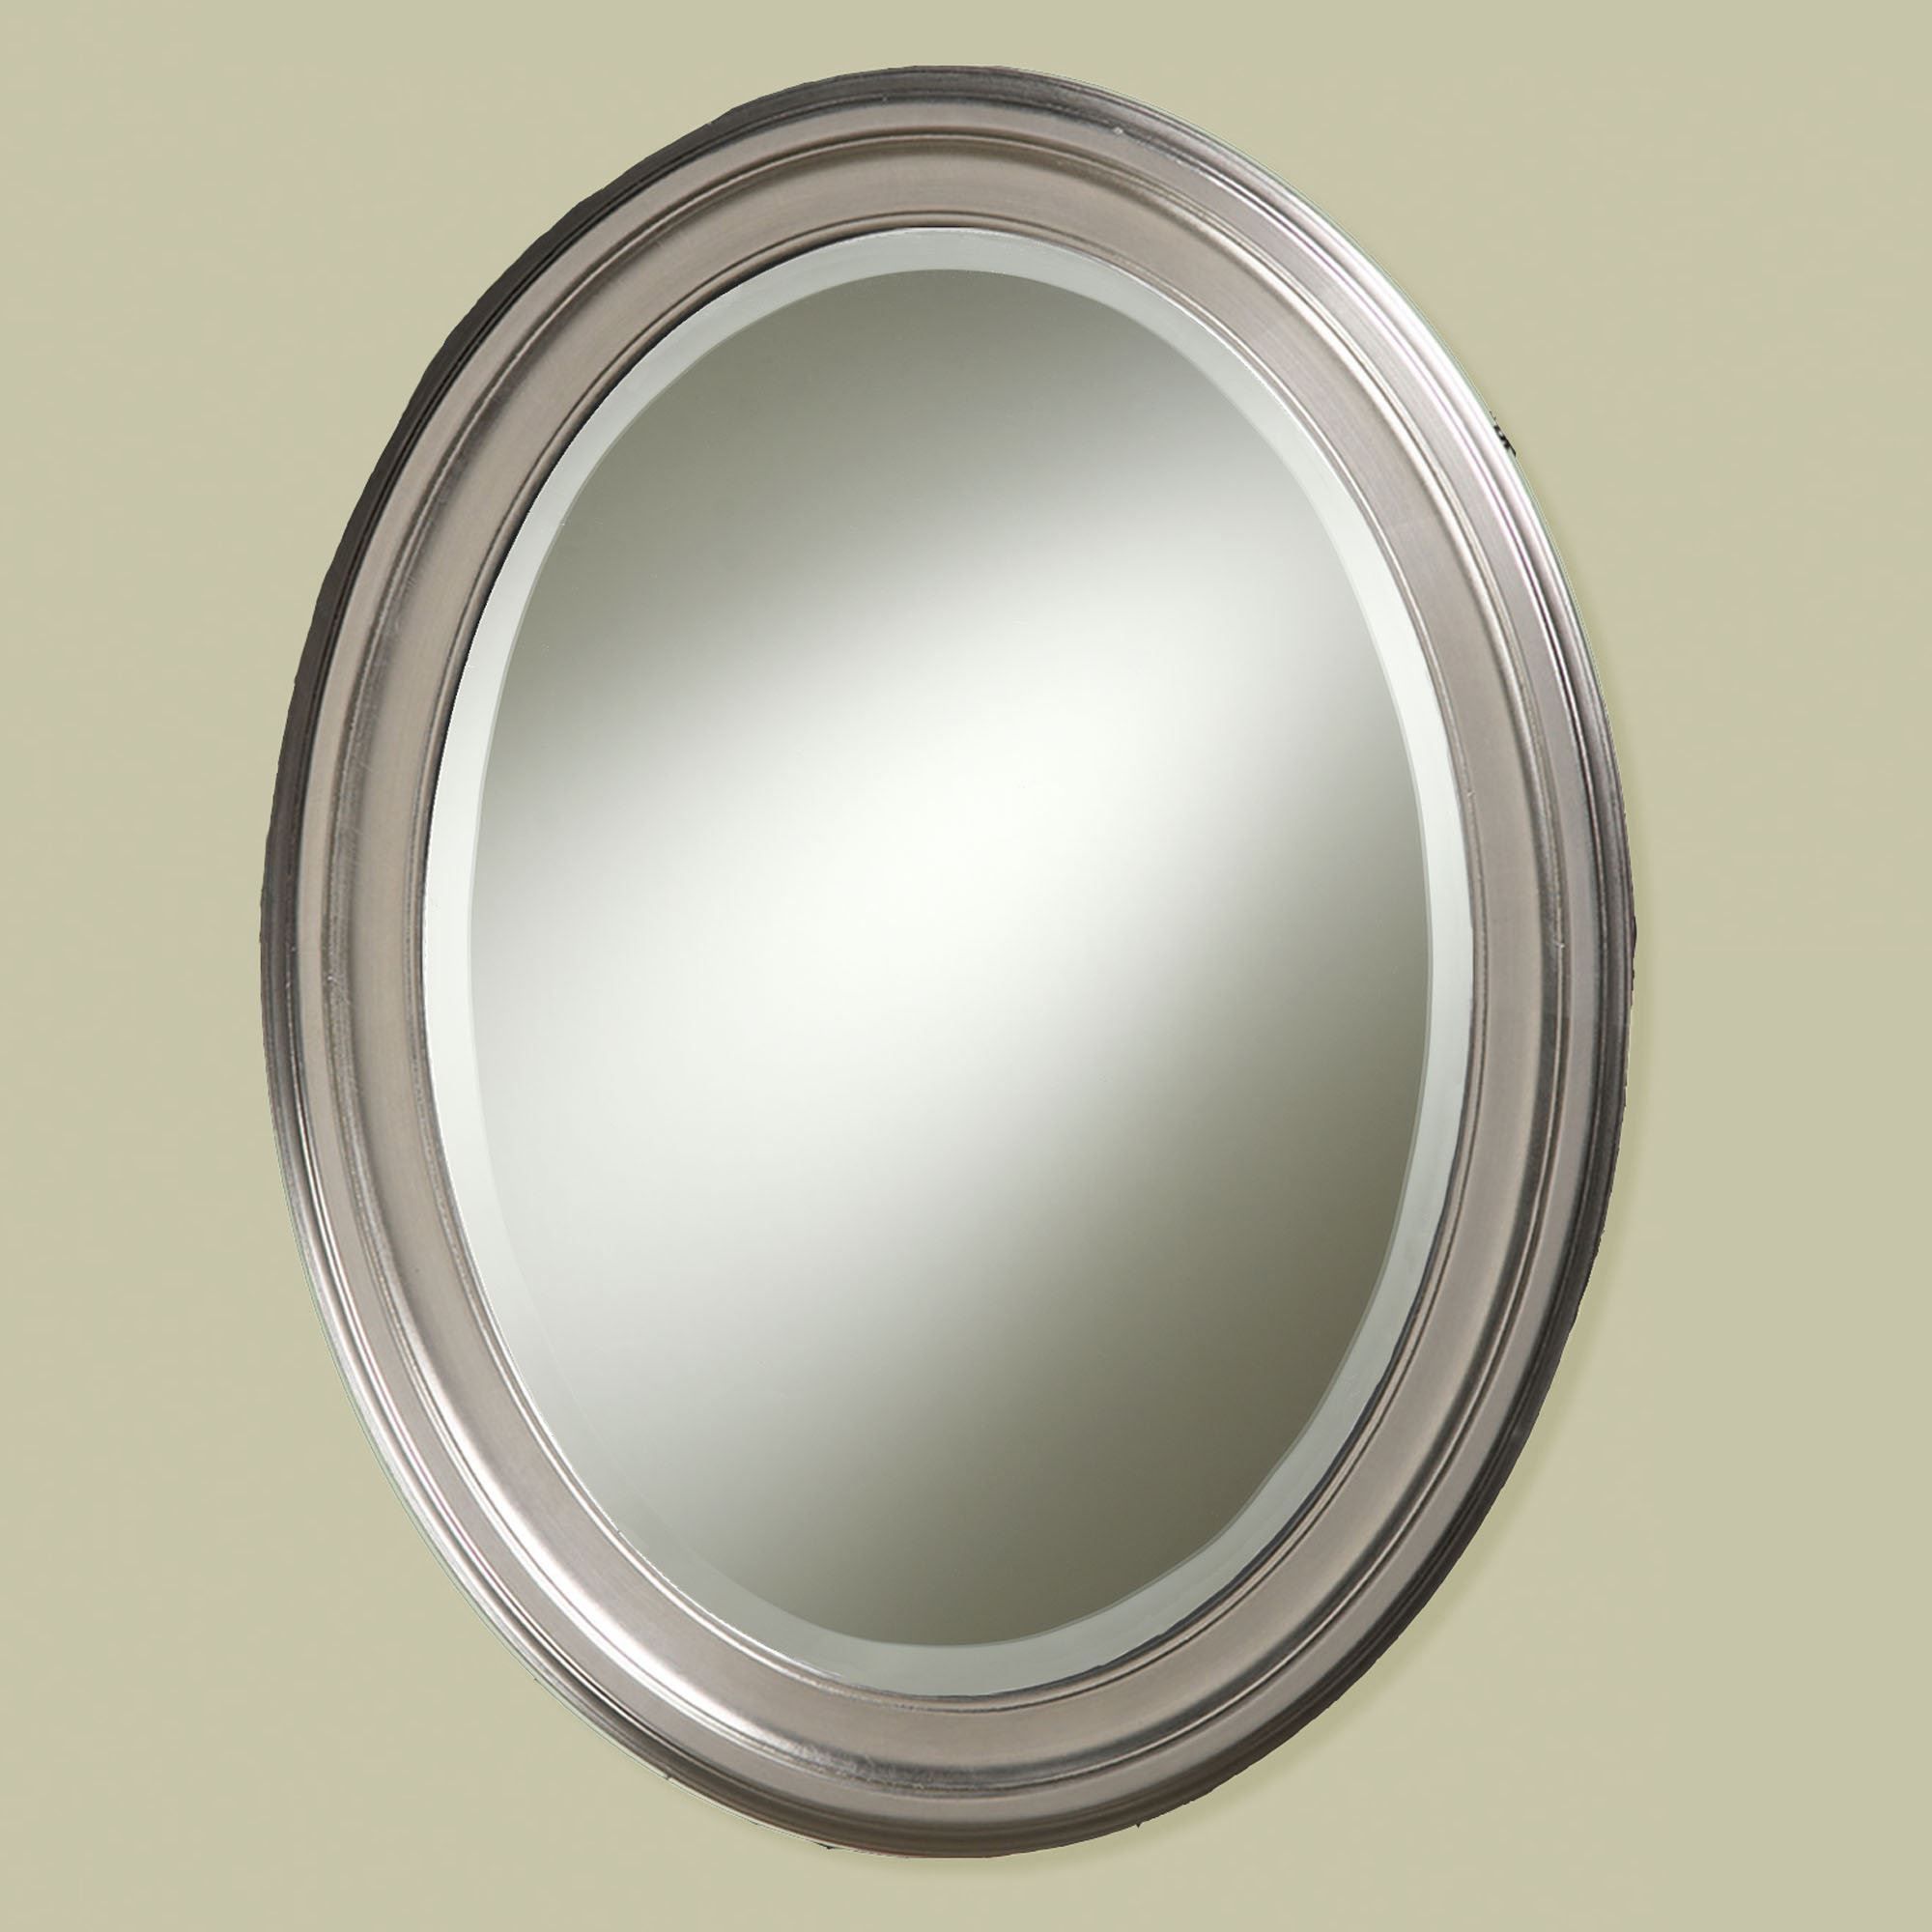 Loree Brushed Nickel Finish Oval Wall Mirror From Howard Elliott In Oxidized Nickel Wall Mirrors (View 8 of 15)